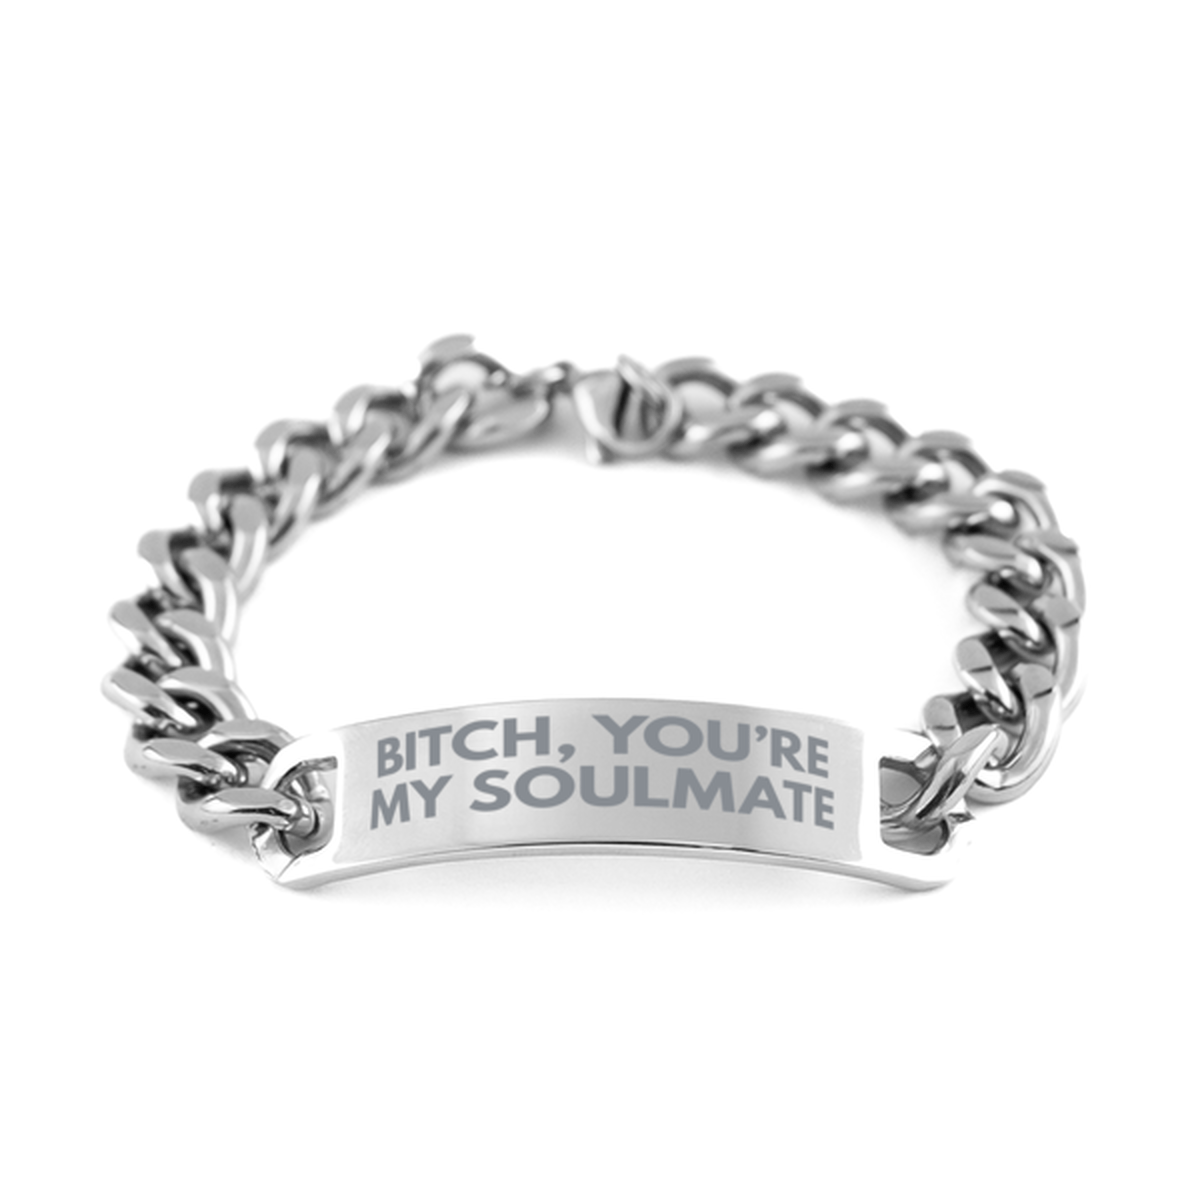 Unbiological Sister Gift - Bitch You're My Soulmate - Cuban Link Chain Stainless Steel Bracelet for Birthday or Christmas - Jewlery Gift for Best Friend, Bestie, BFF